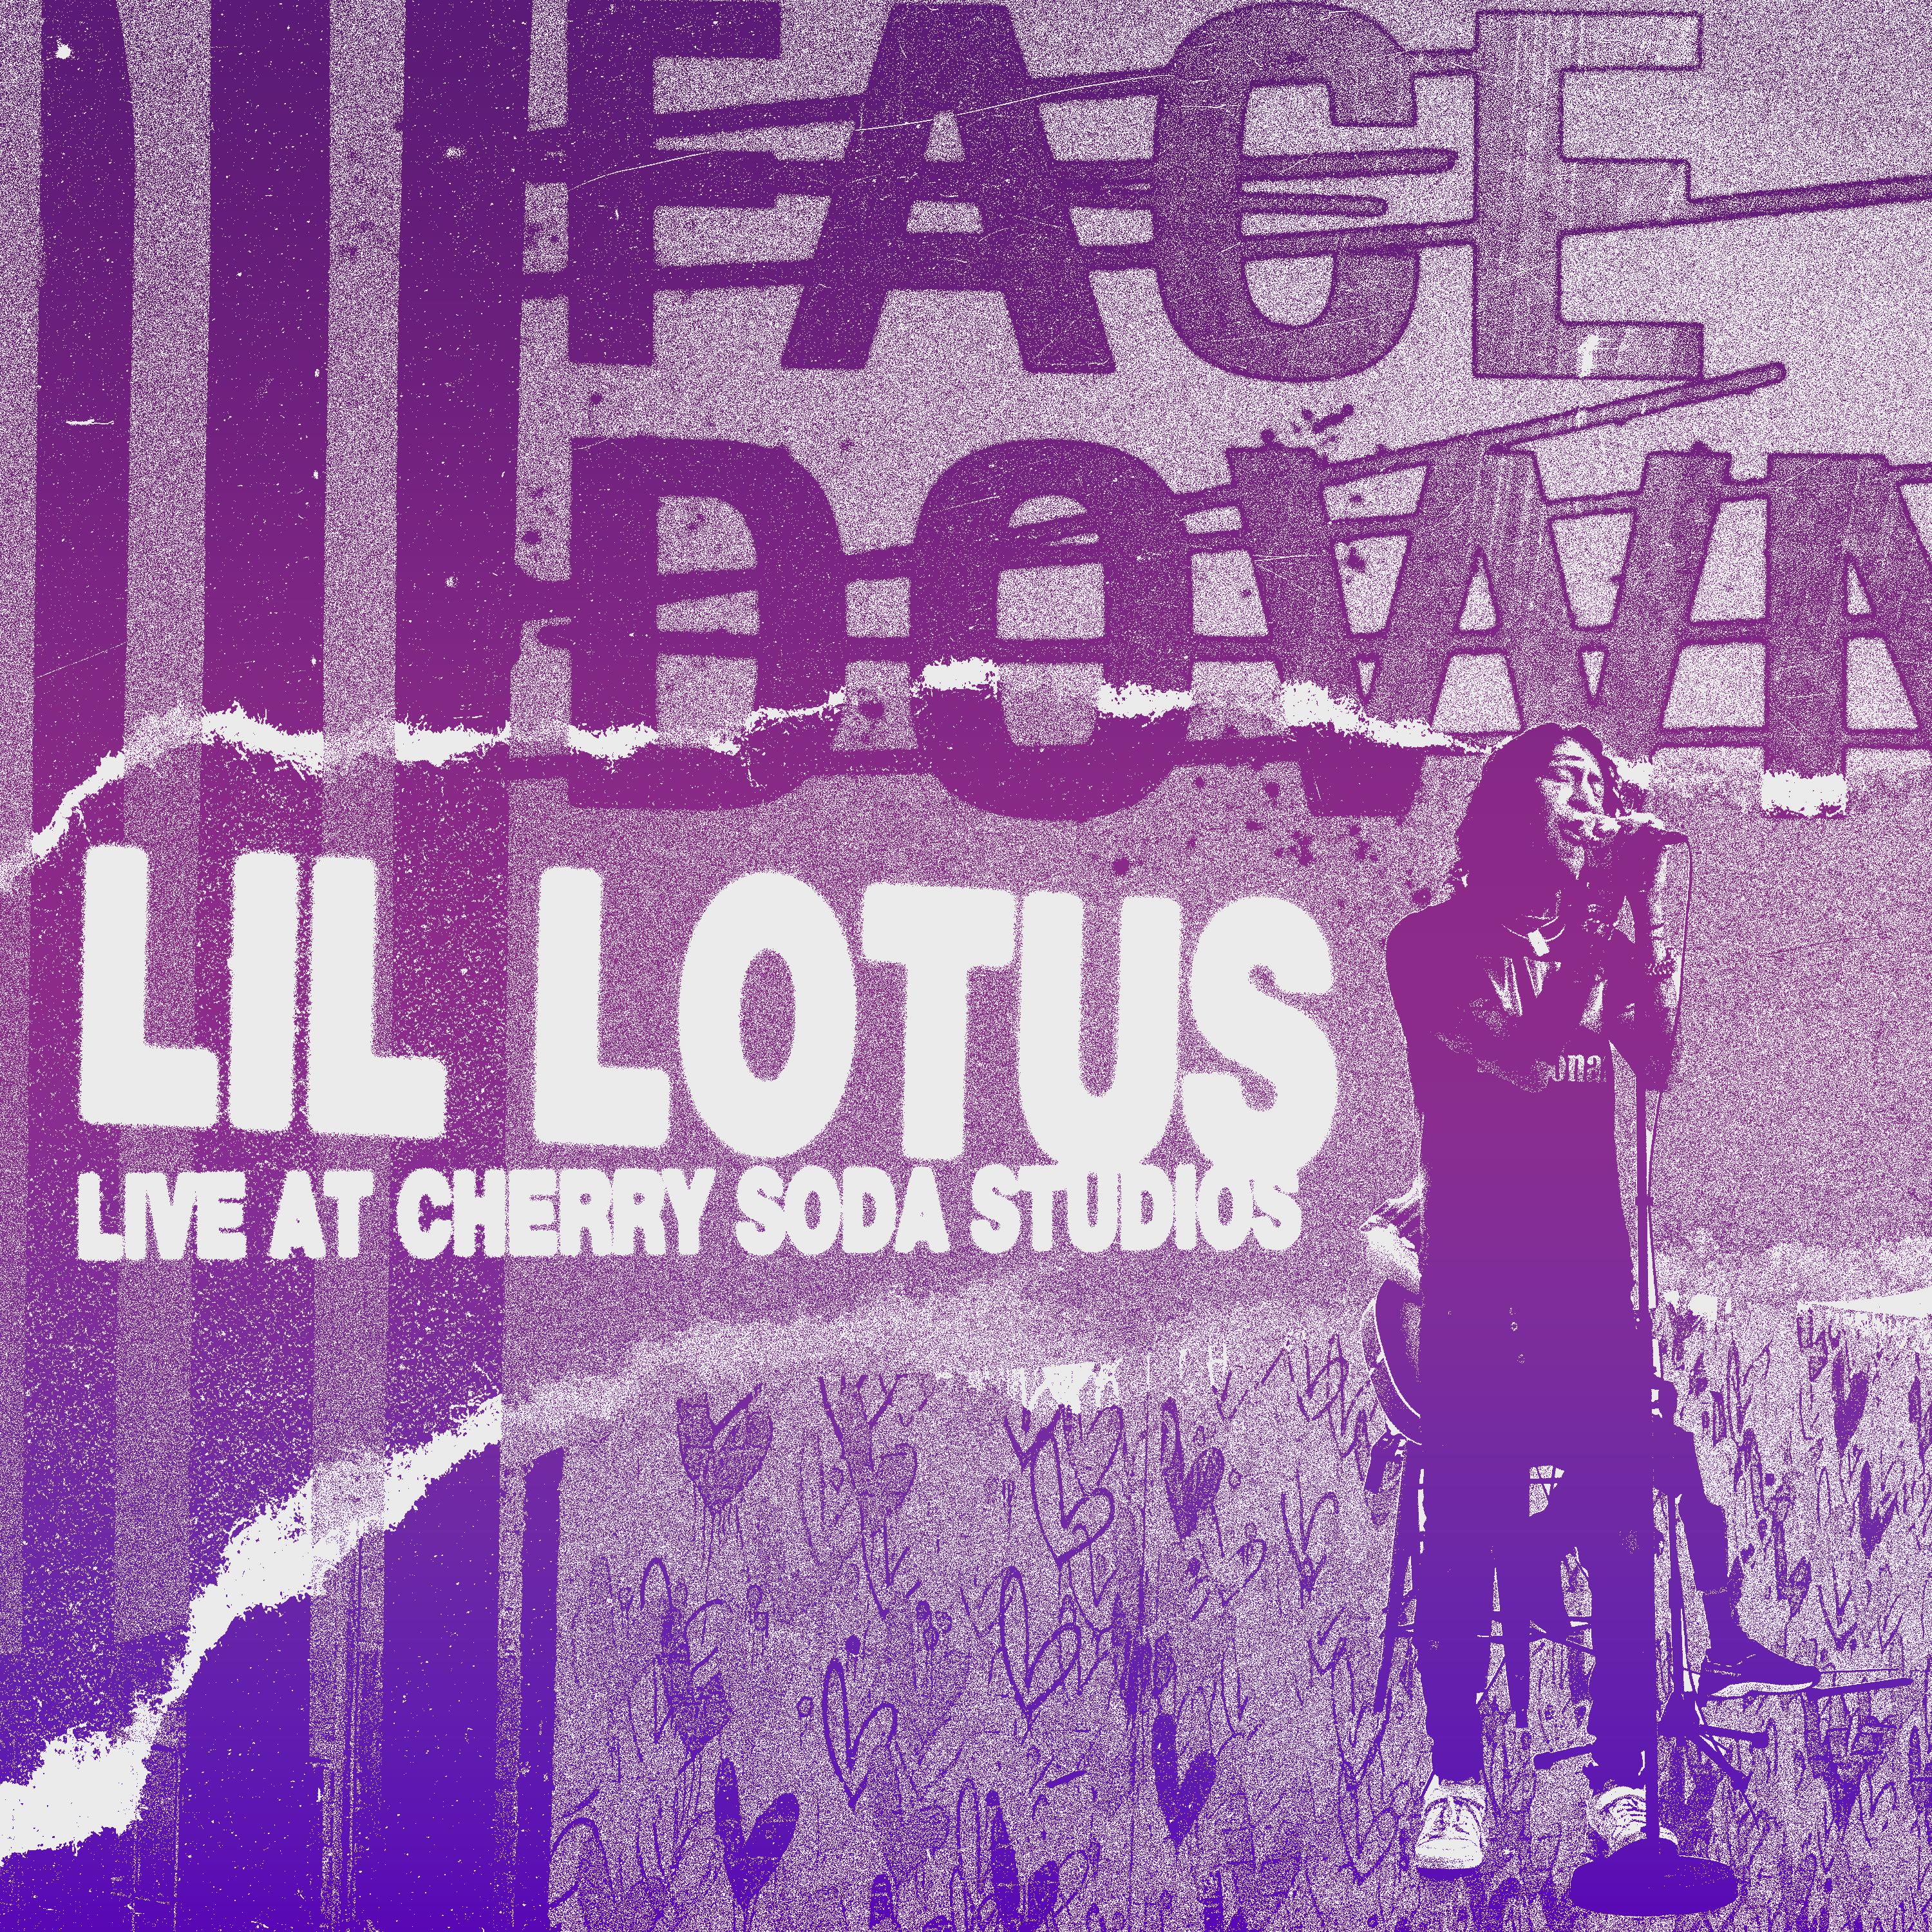 Lil Lotus - Face Down (Live at Cherry Soda Studios)